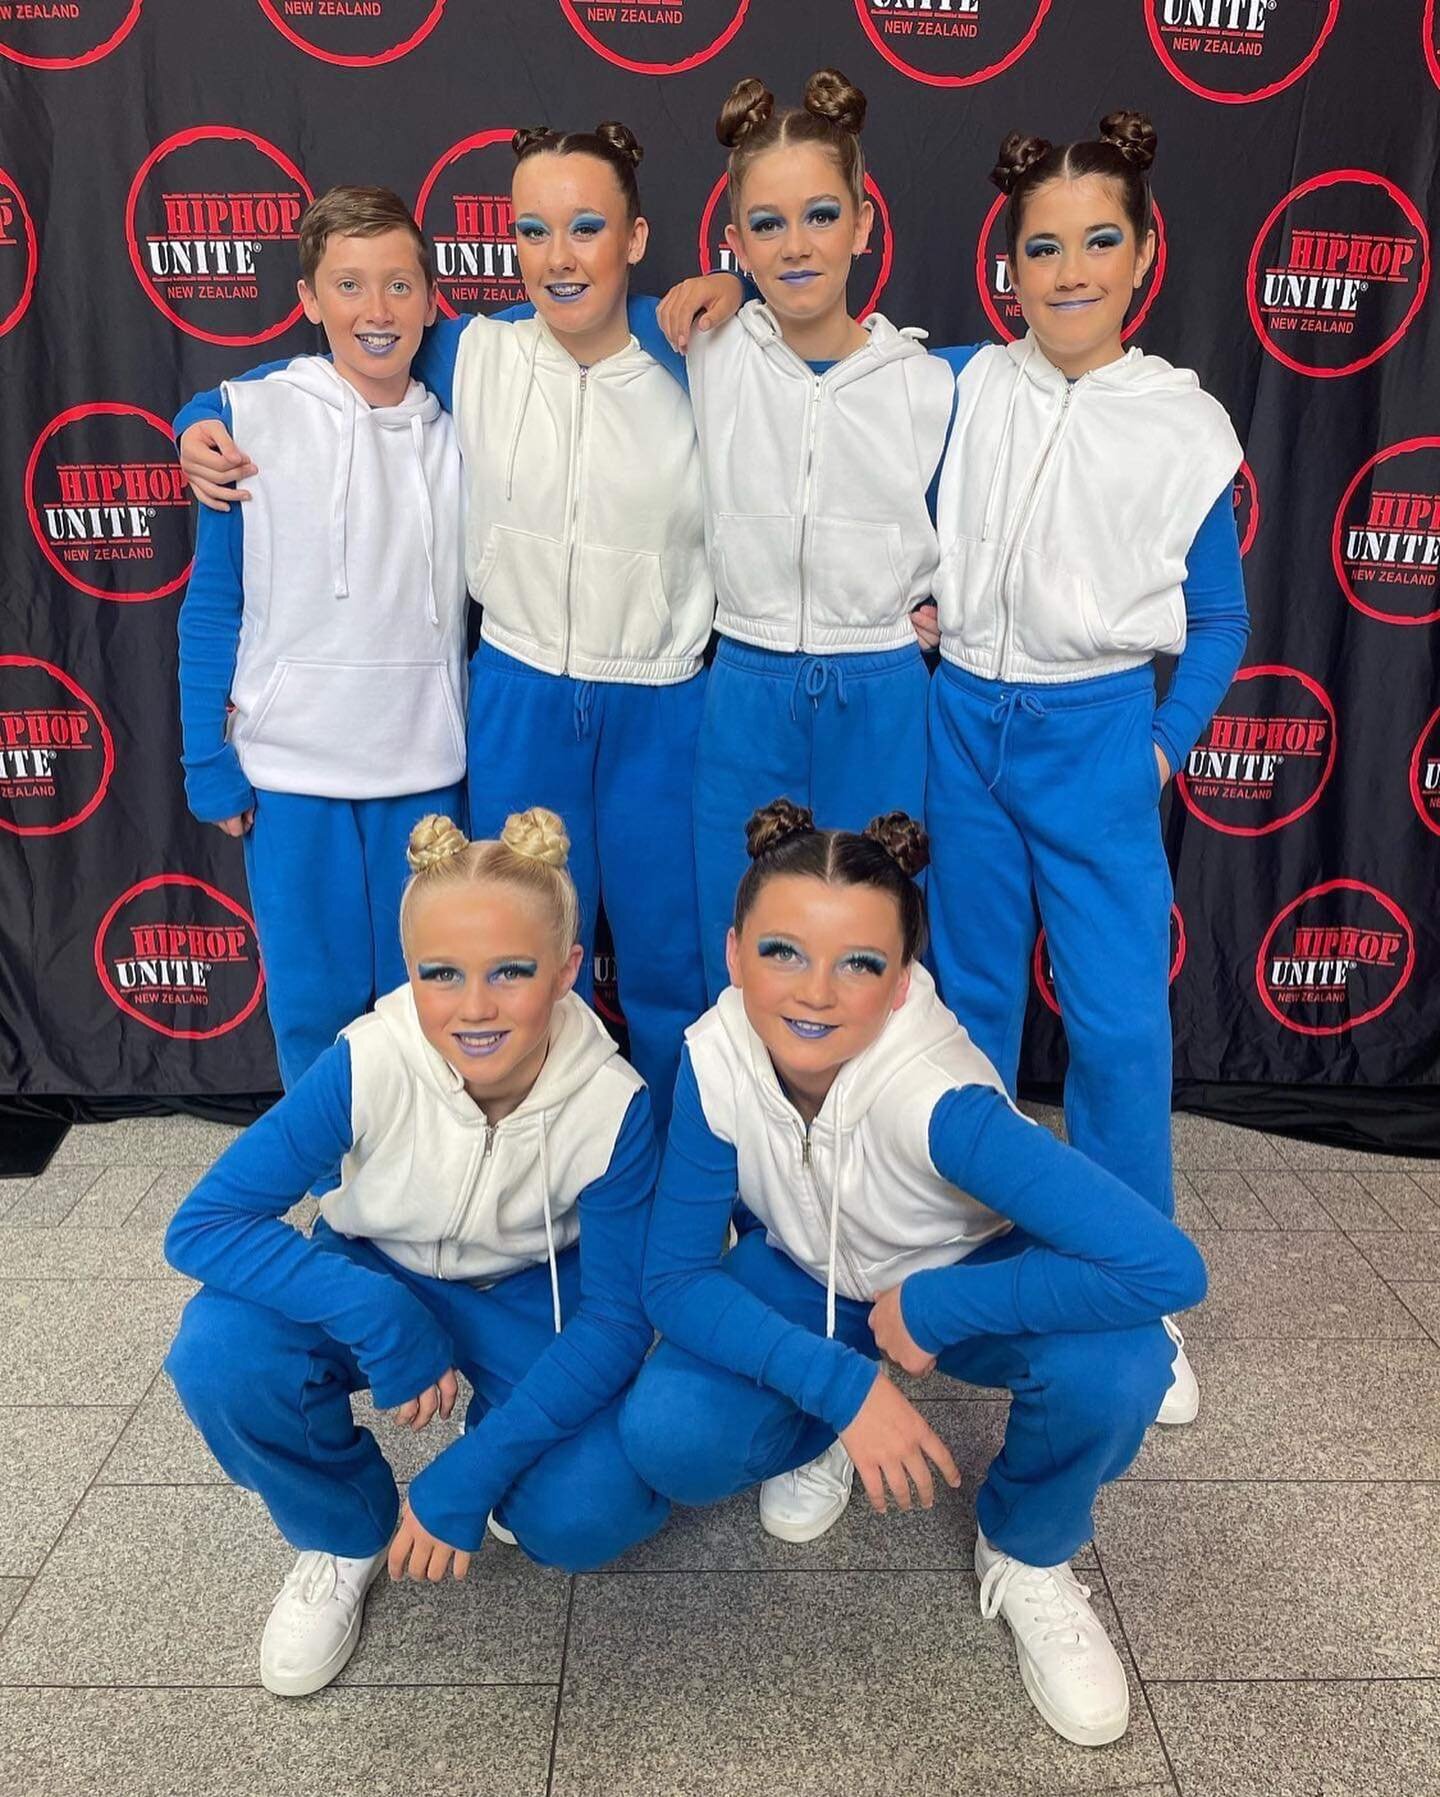 Going back to the weekend before at @hiphopunitenz nationals we are so proud of Boost, they have worked so hard and placed 9th in NZ from 17 crews. Hectic duo also represented @legacydancenz so well! Thanks @annelisegrace16 for your amazing choreogra